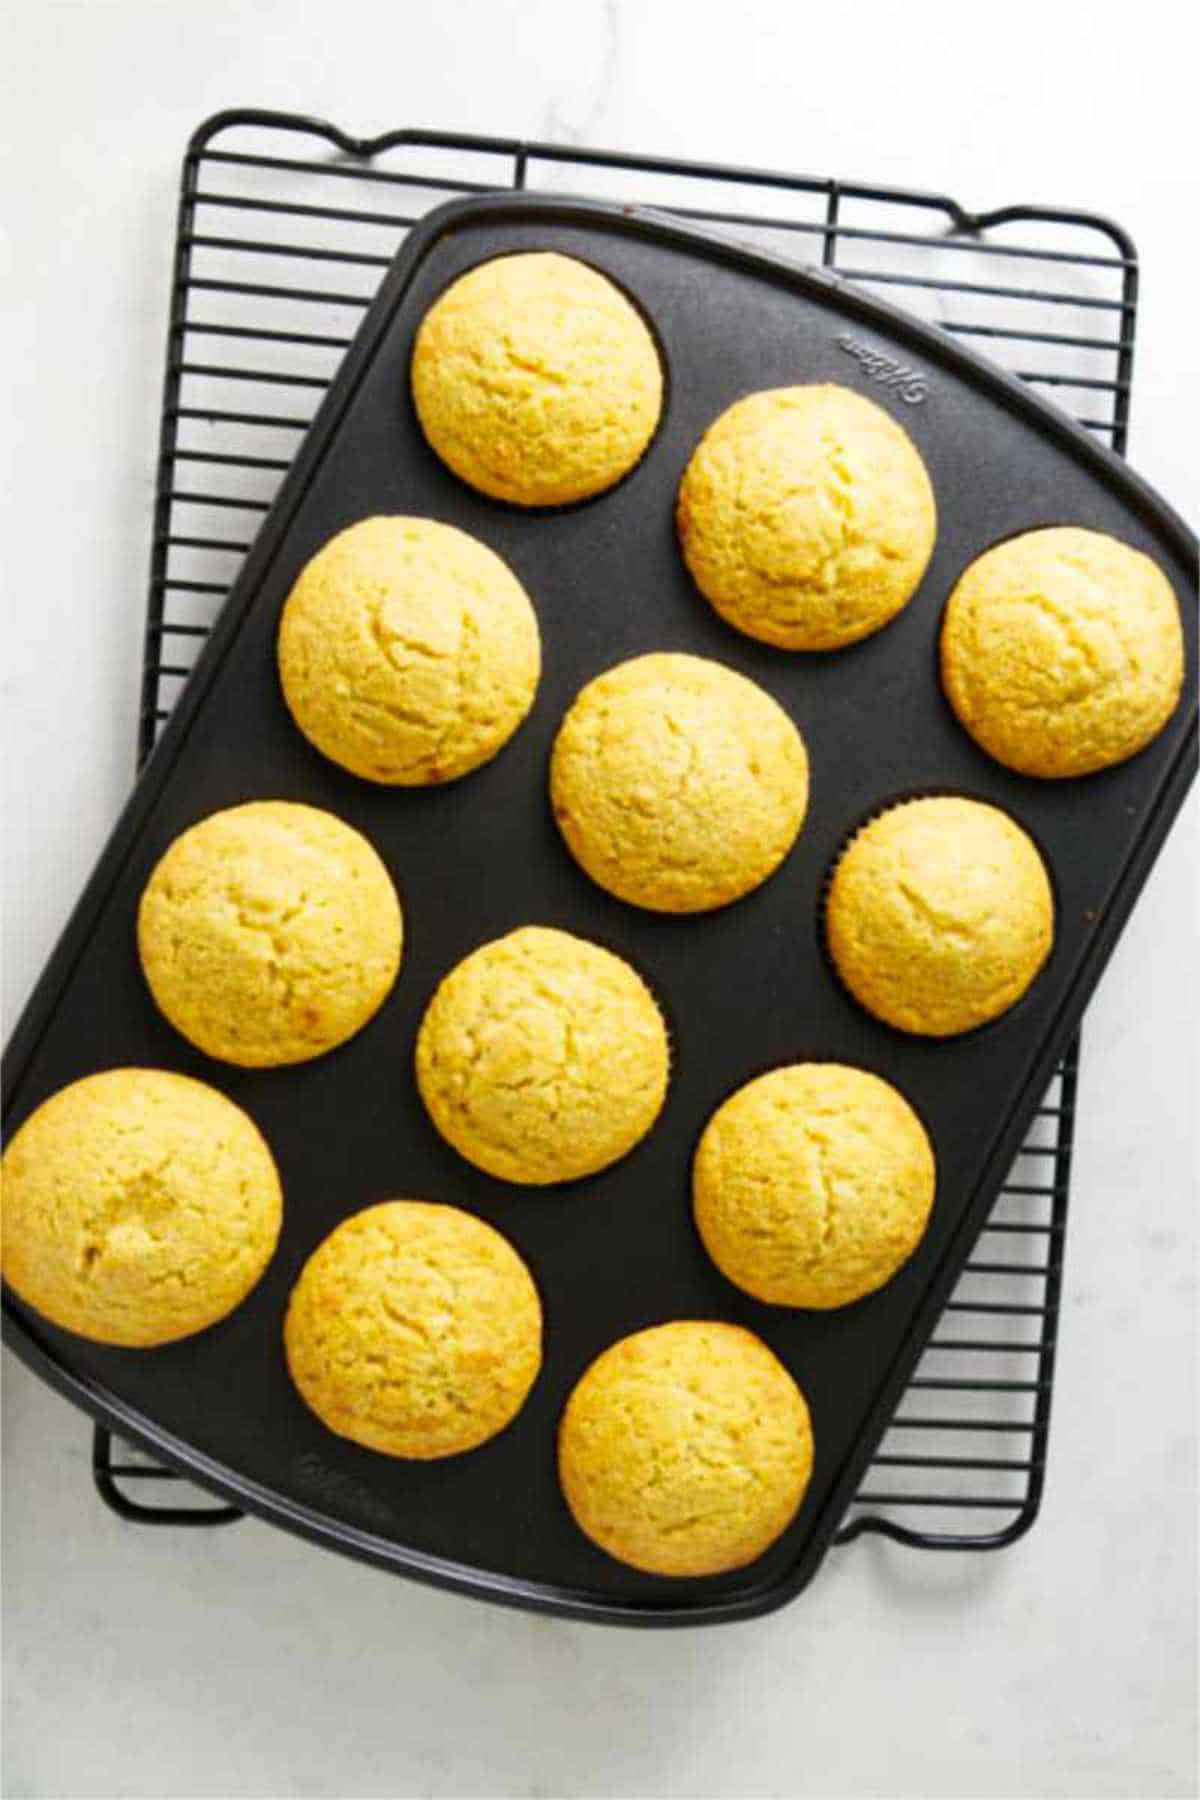 Cooling Cracker Barrel cornbread muffins on a rack on a white background.